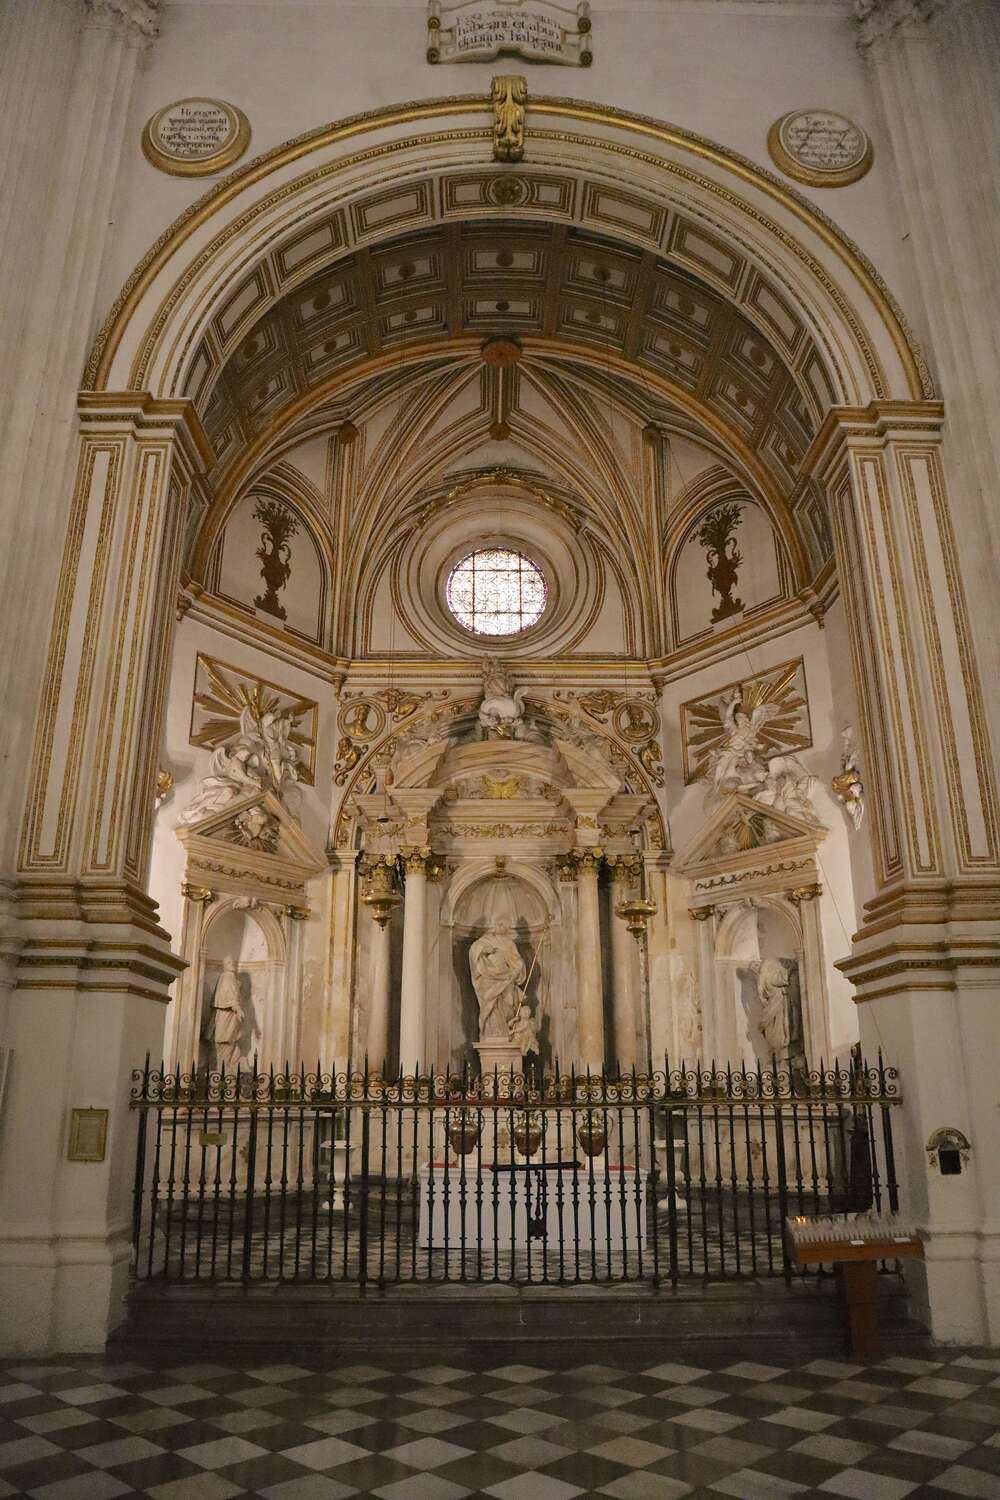 Altar-inside-the-cathedral-of-Granada